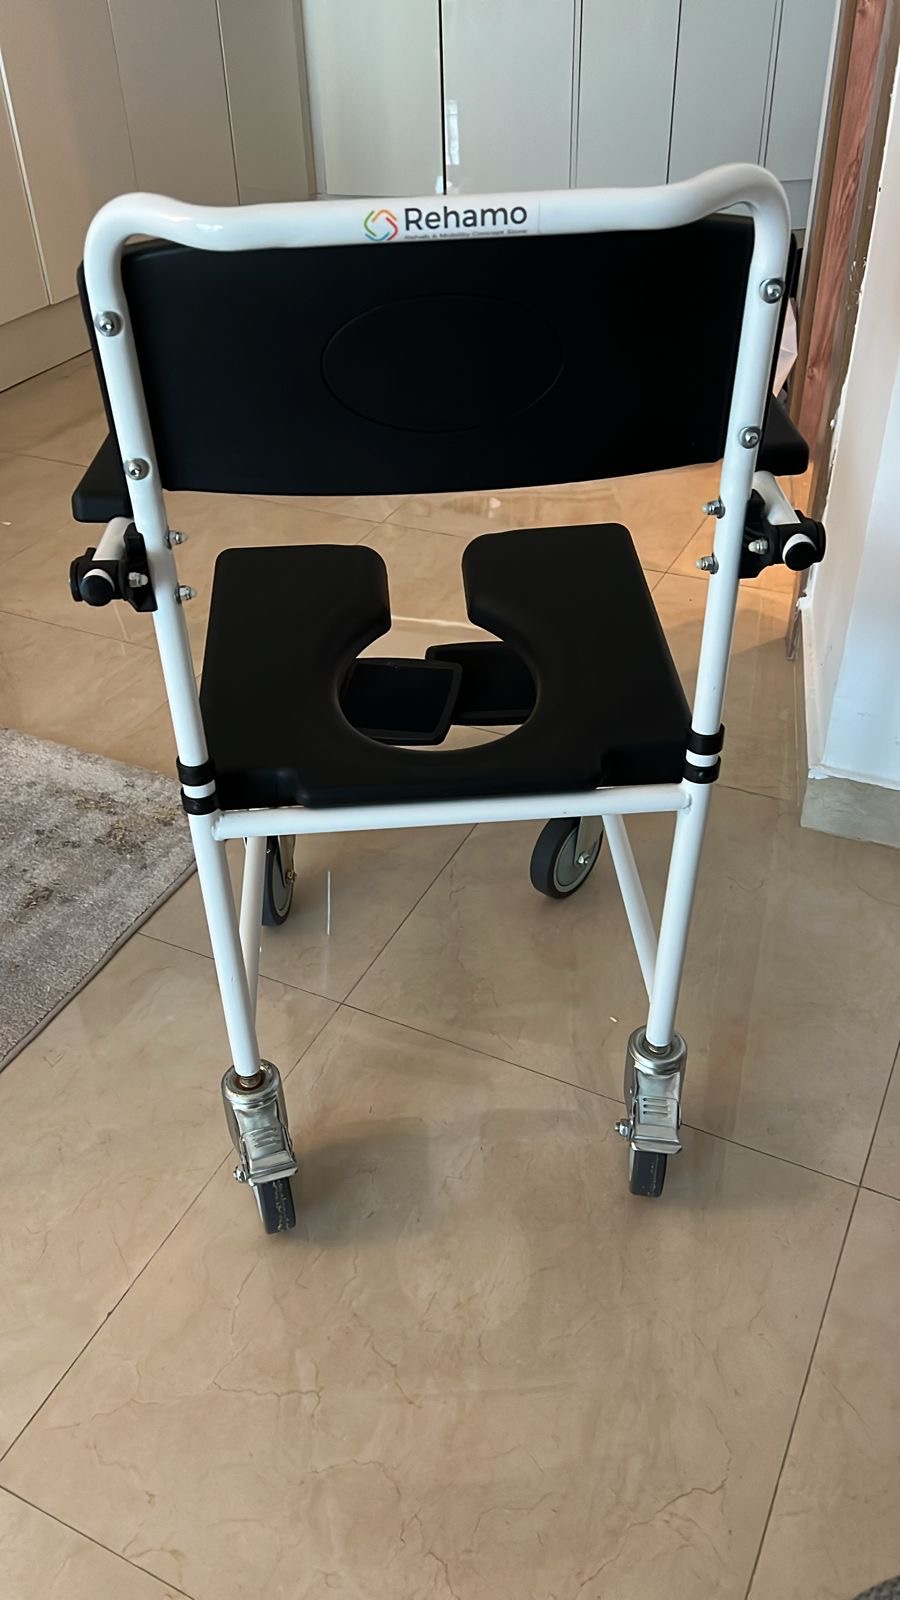 Rehamo Shower Commode chair with Flip Arm and Swing Away Footrest used